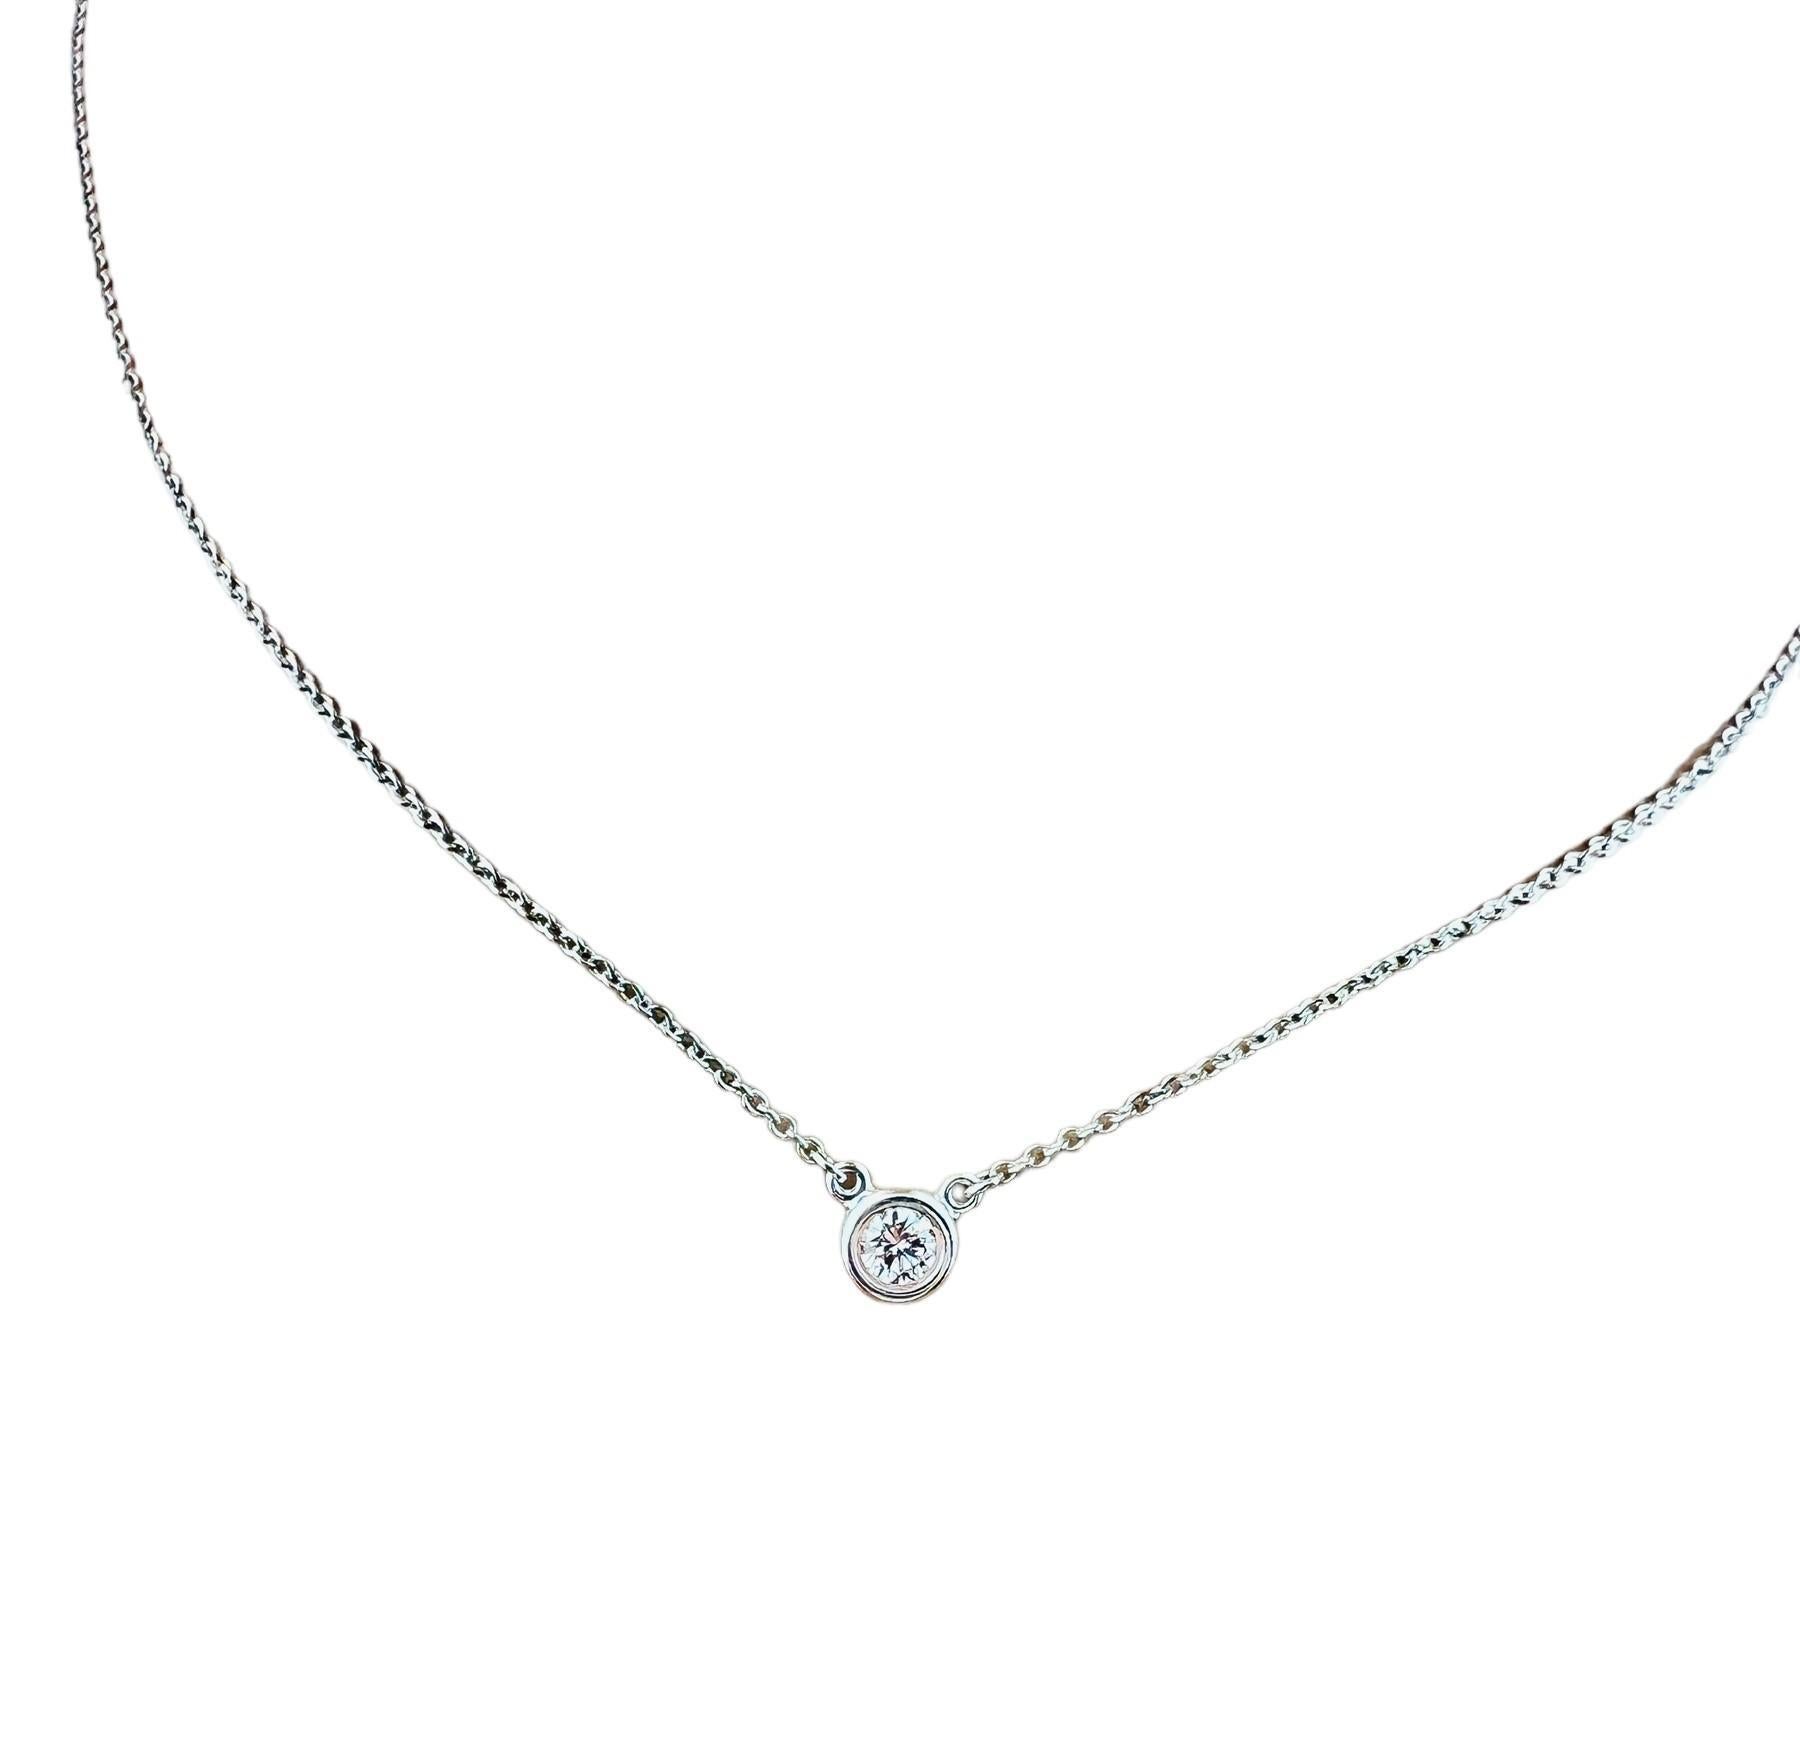 Tiffany & Co. Peretti Sterling Diamond by the Yard Necklace

This diamond pendant necklace was designed for Tiffany by Elsa Peretti for the diamond by the yard collection. 

The necklace is 16